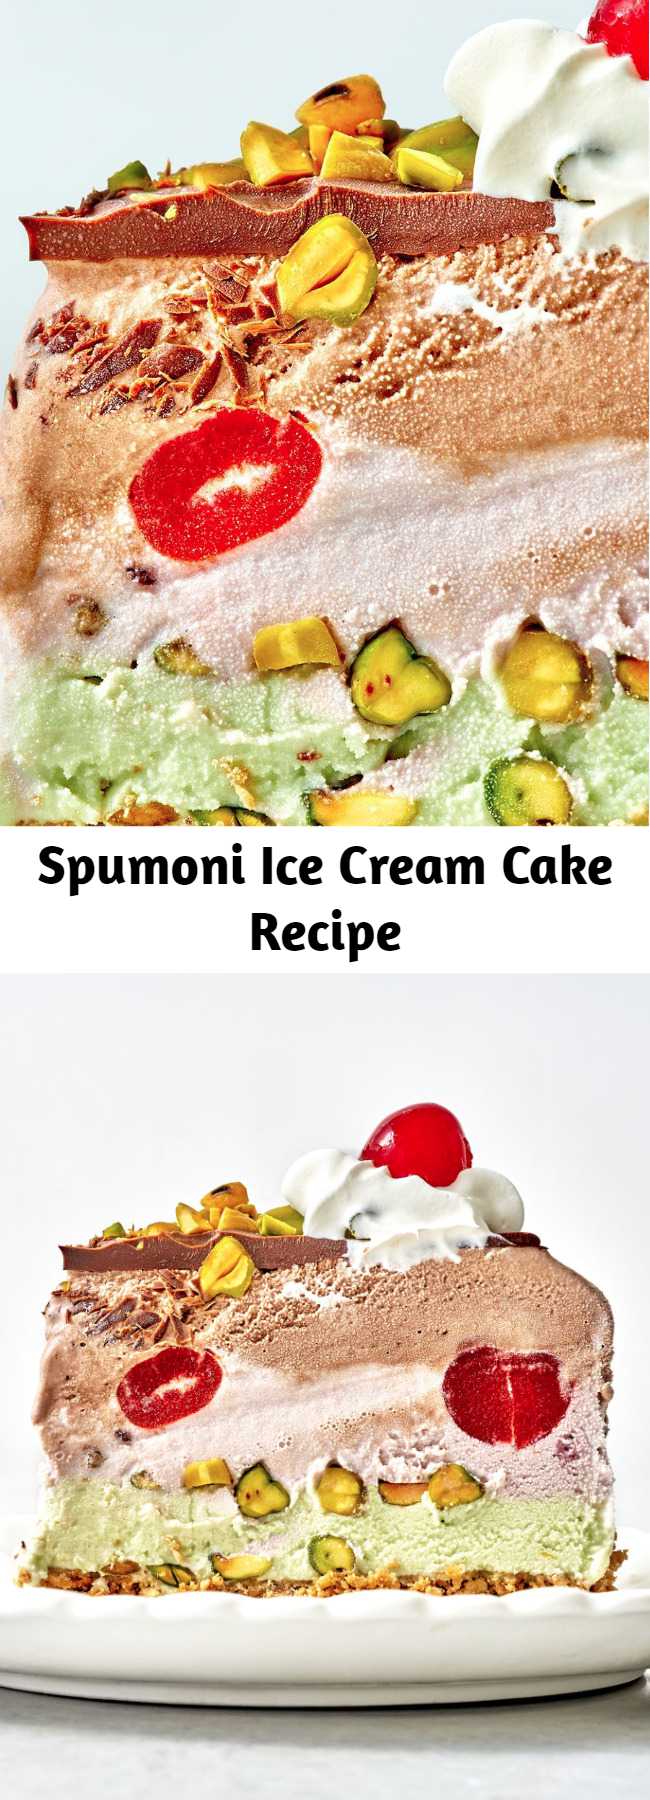 Spumoni Ice Cream Cake Recipe - Layers of ice cream, pistachios, and maraschino cherries are topped with homemade magic shell and whipped cream in this stunning Spumoni Ice Cream Cake recipe.